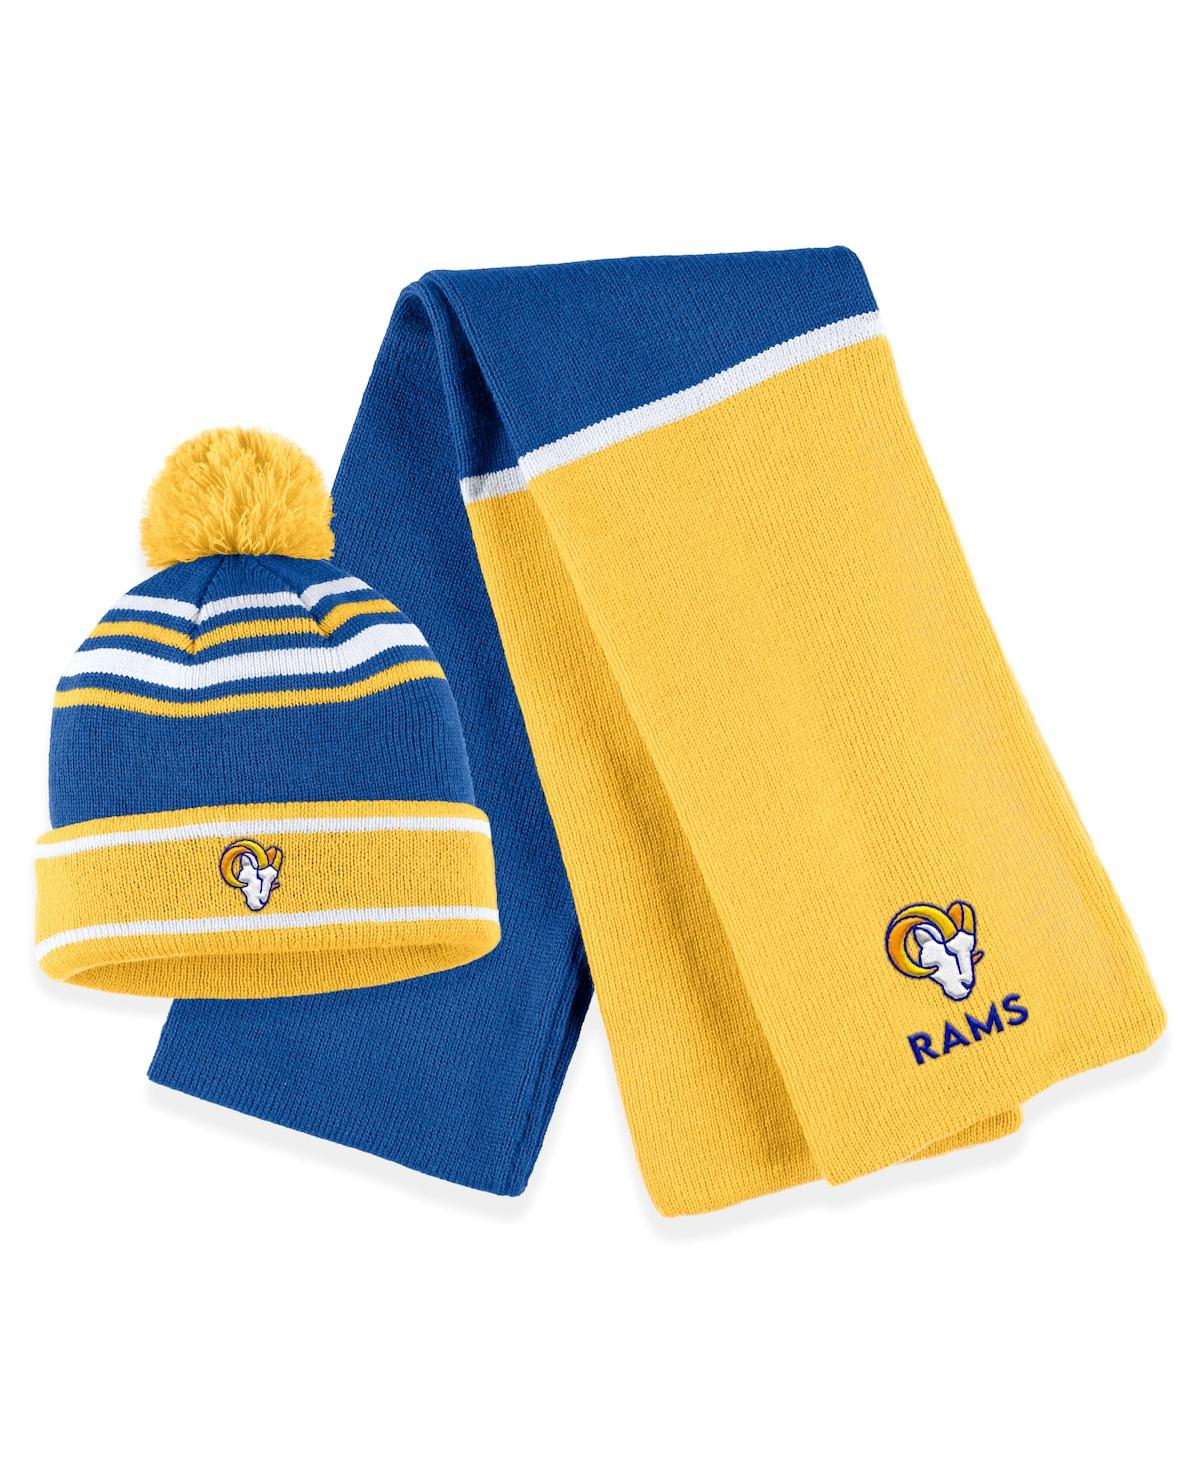 Shop Wear By Erin Andrews Women's  Royal Los Angeles Rams Colorblock Cuffed Knit Hat With Pom And Scarf Se